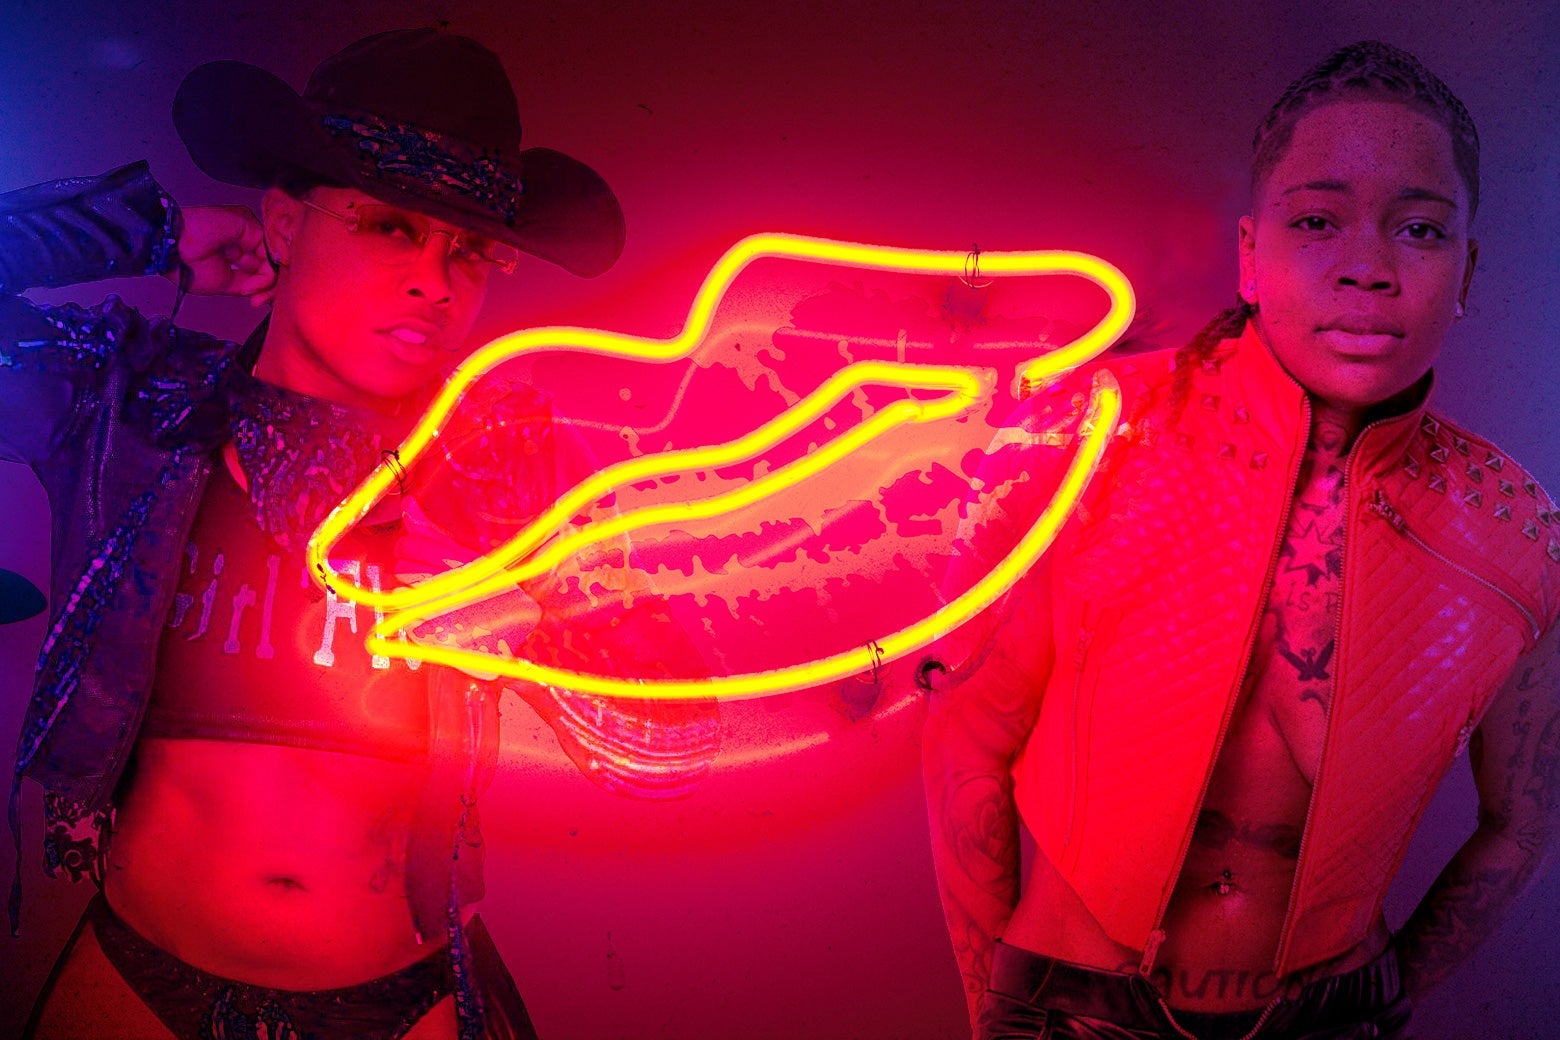 Dom lesbian strippers How performers like Girl Flexxx and Kaution are changing the game. image